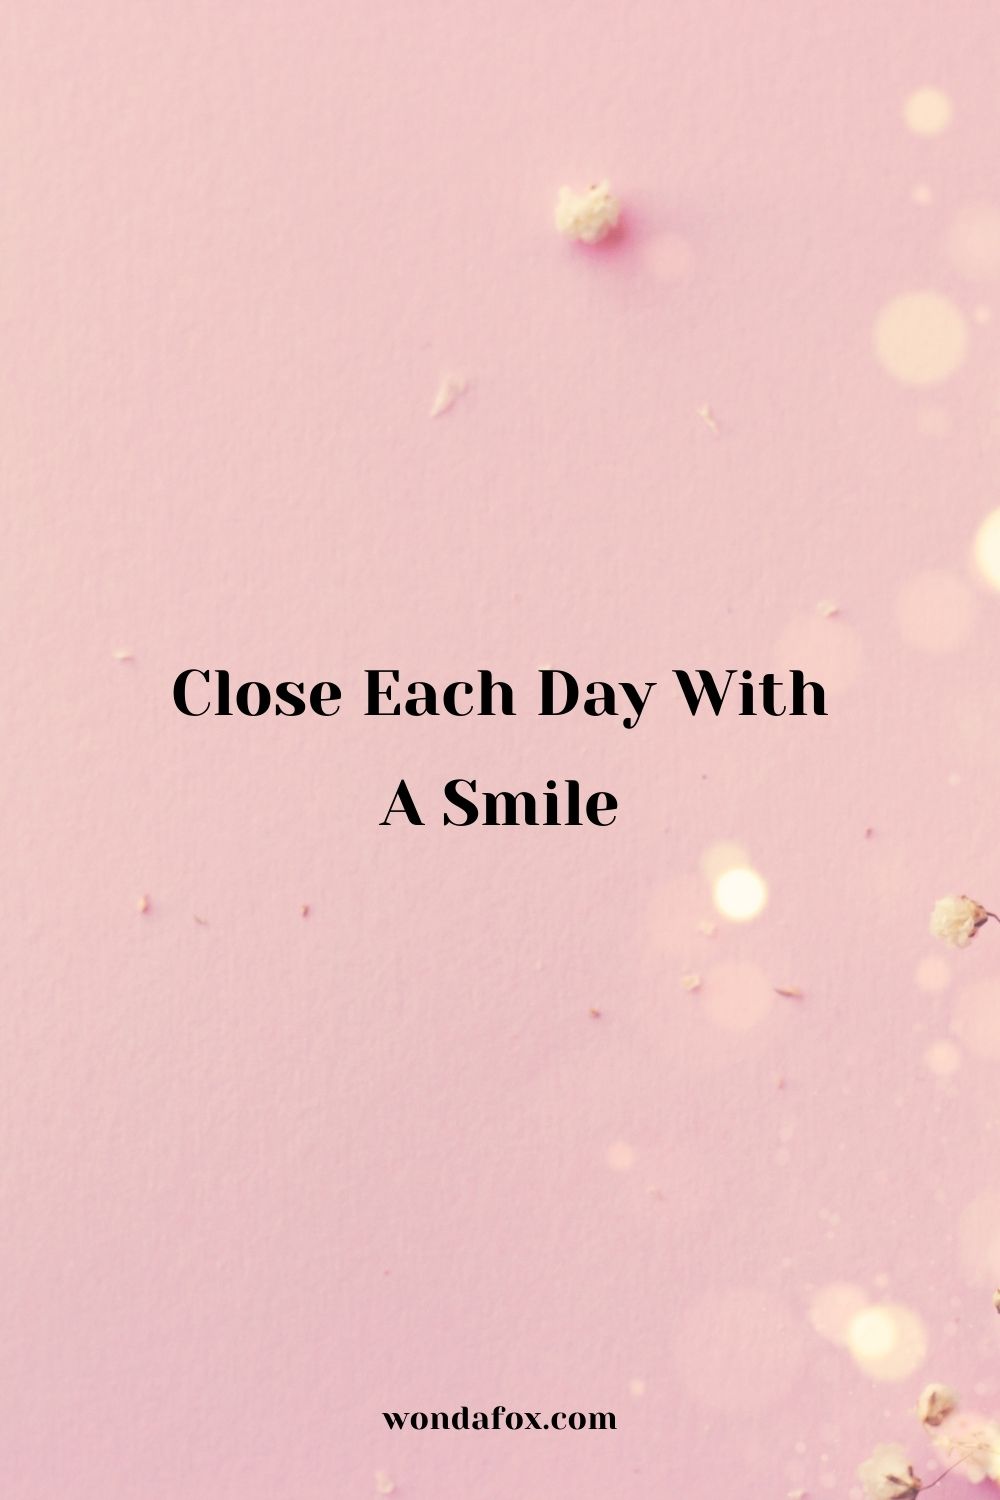 Close each day with a smile